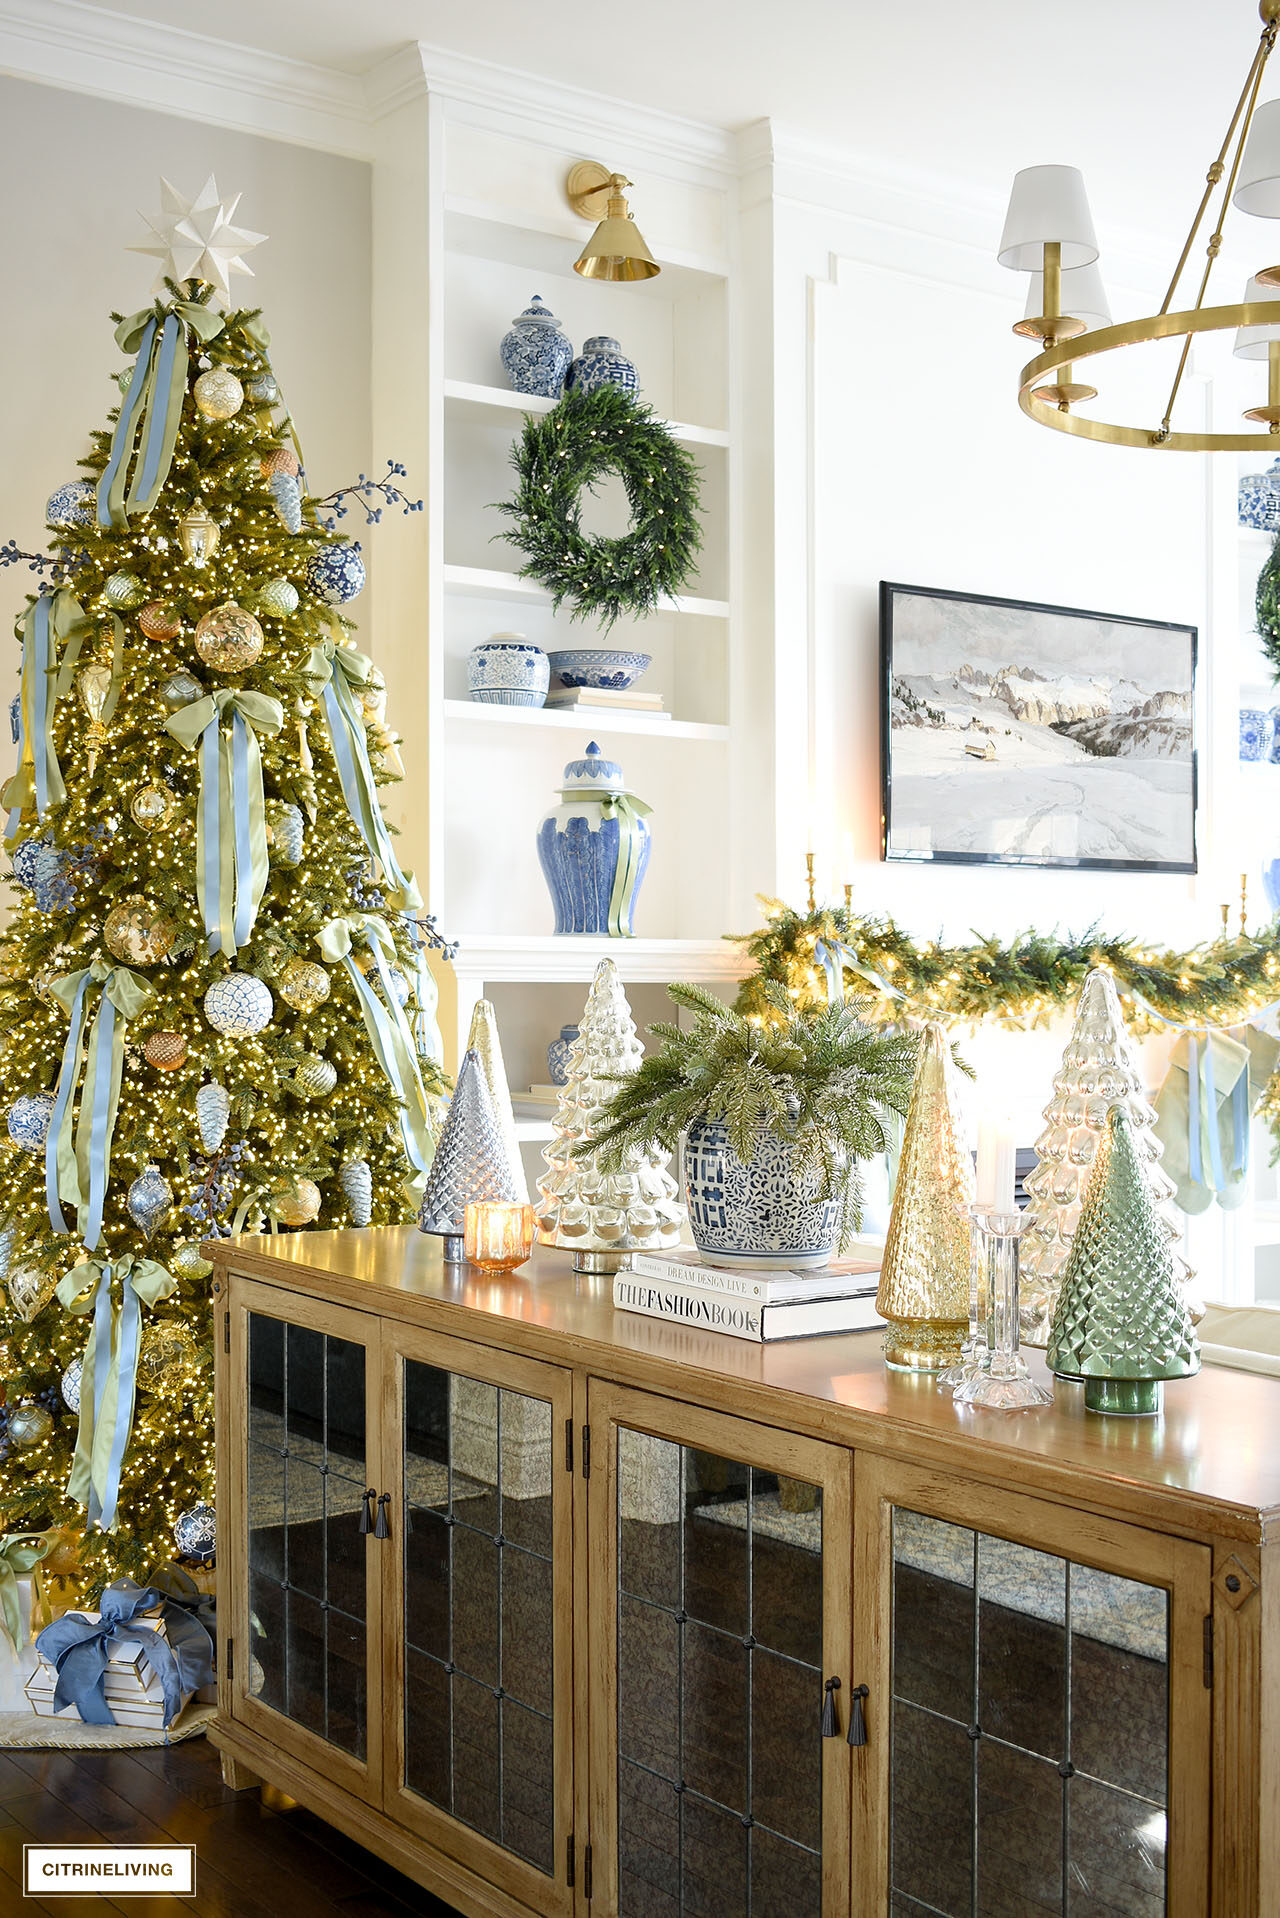 A wood and mirrored buffet decorated for Christmas with mercury glass trees in silver, blue, gold and green with a greenery arrangement in a blue and white ginger jar.